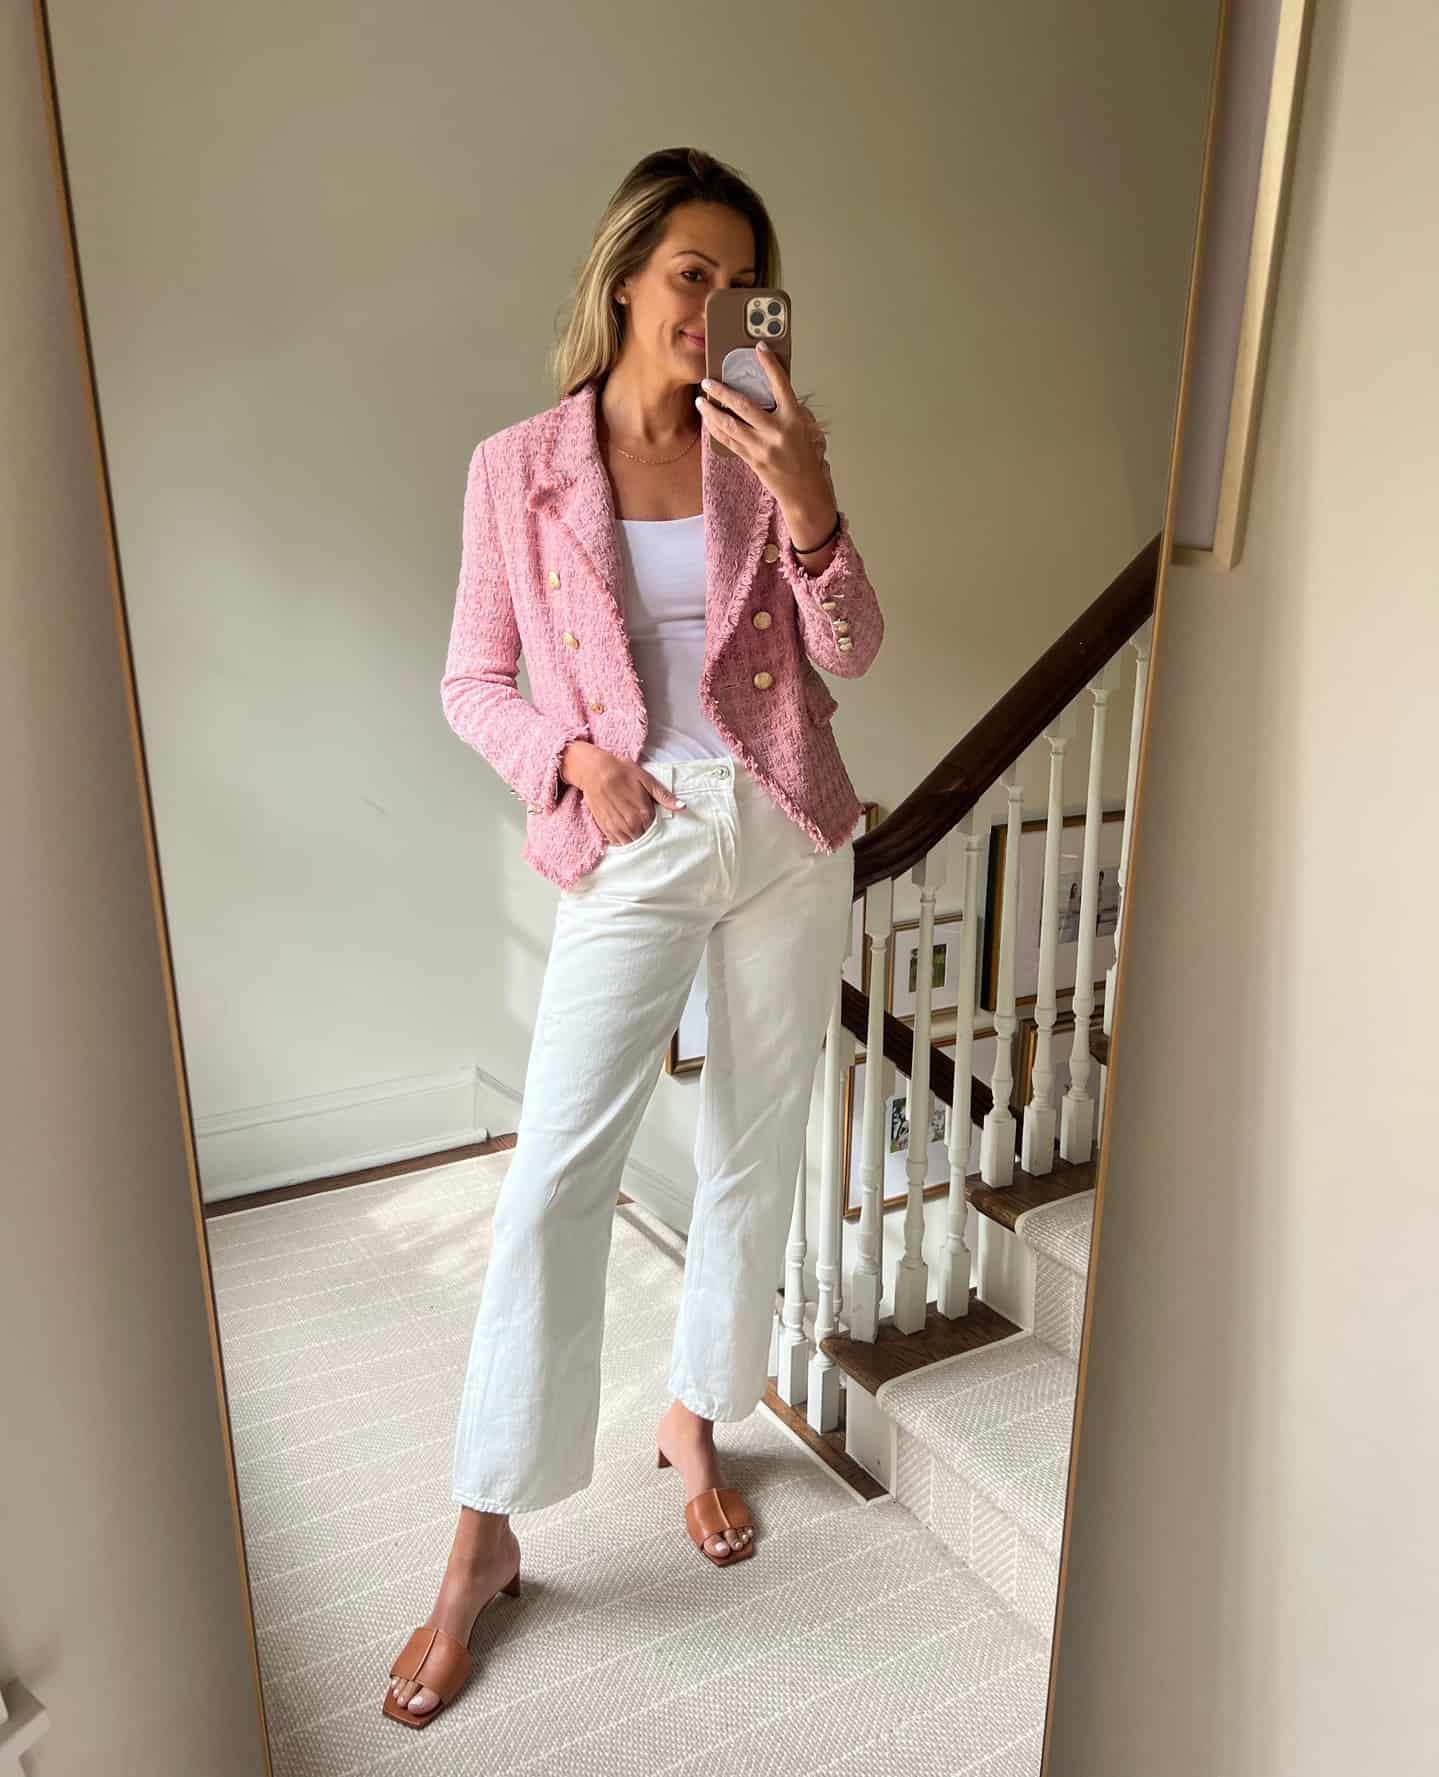 Woman wearing a country club attire outfit with a pink tweed jacket, white jeans, and brown sandals